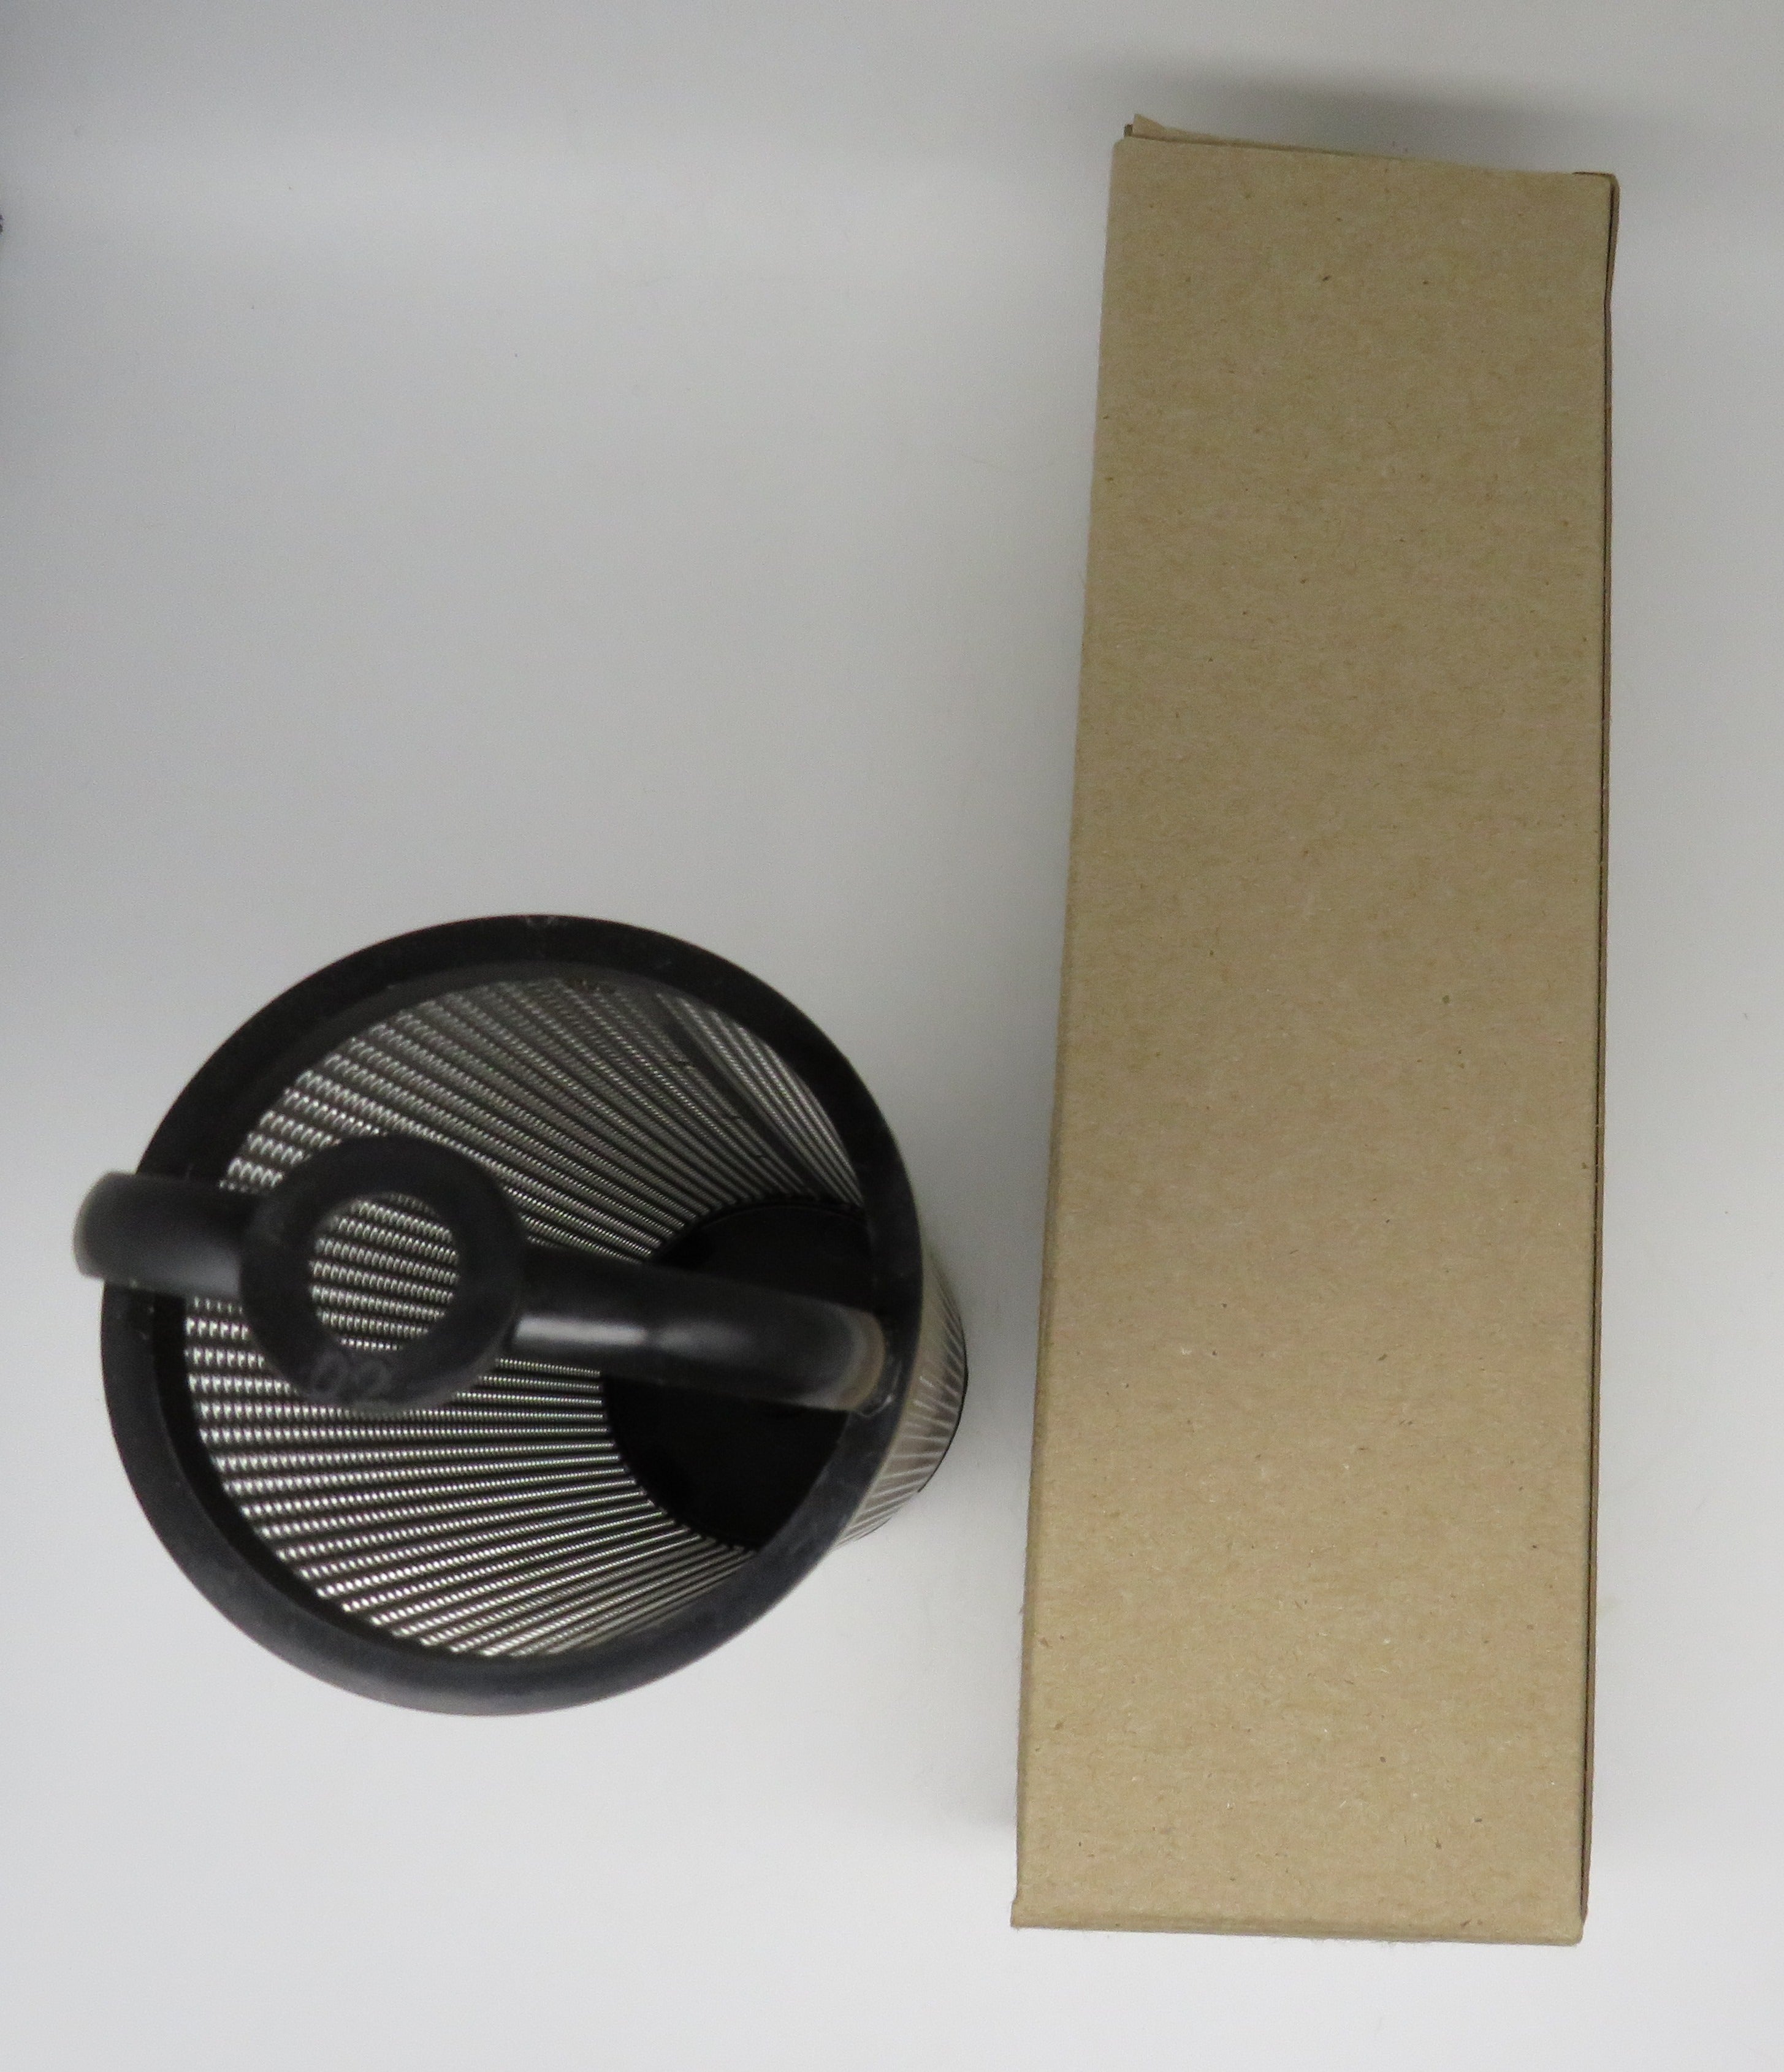 BS-5 Groco Strainer Filter Basket For SA-1250 (Replaces SS-76-A)